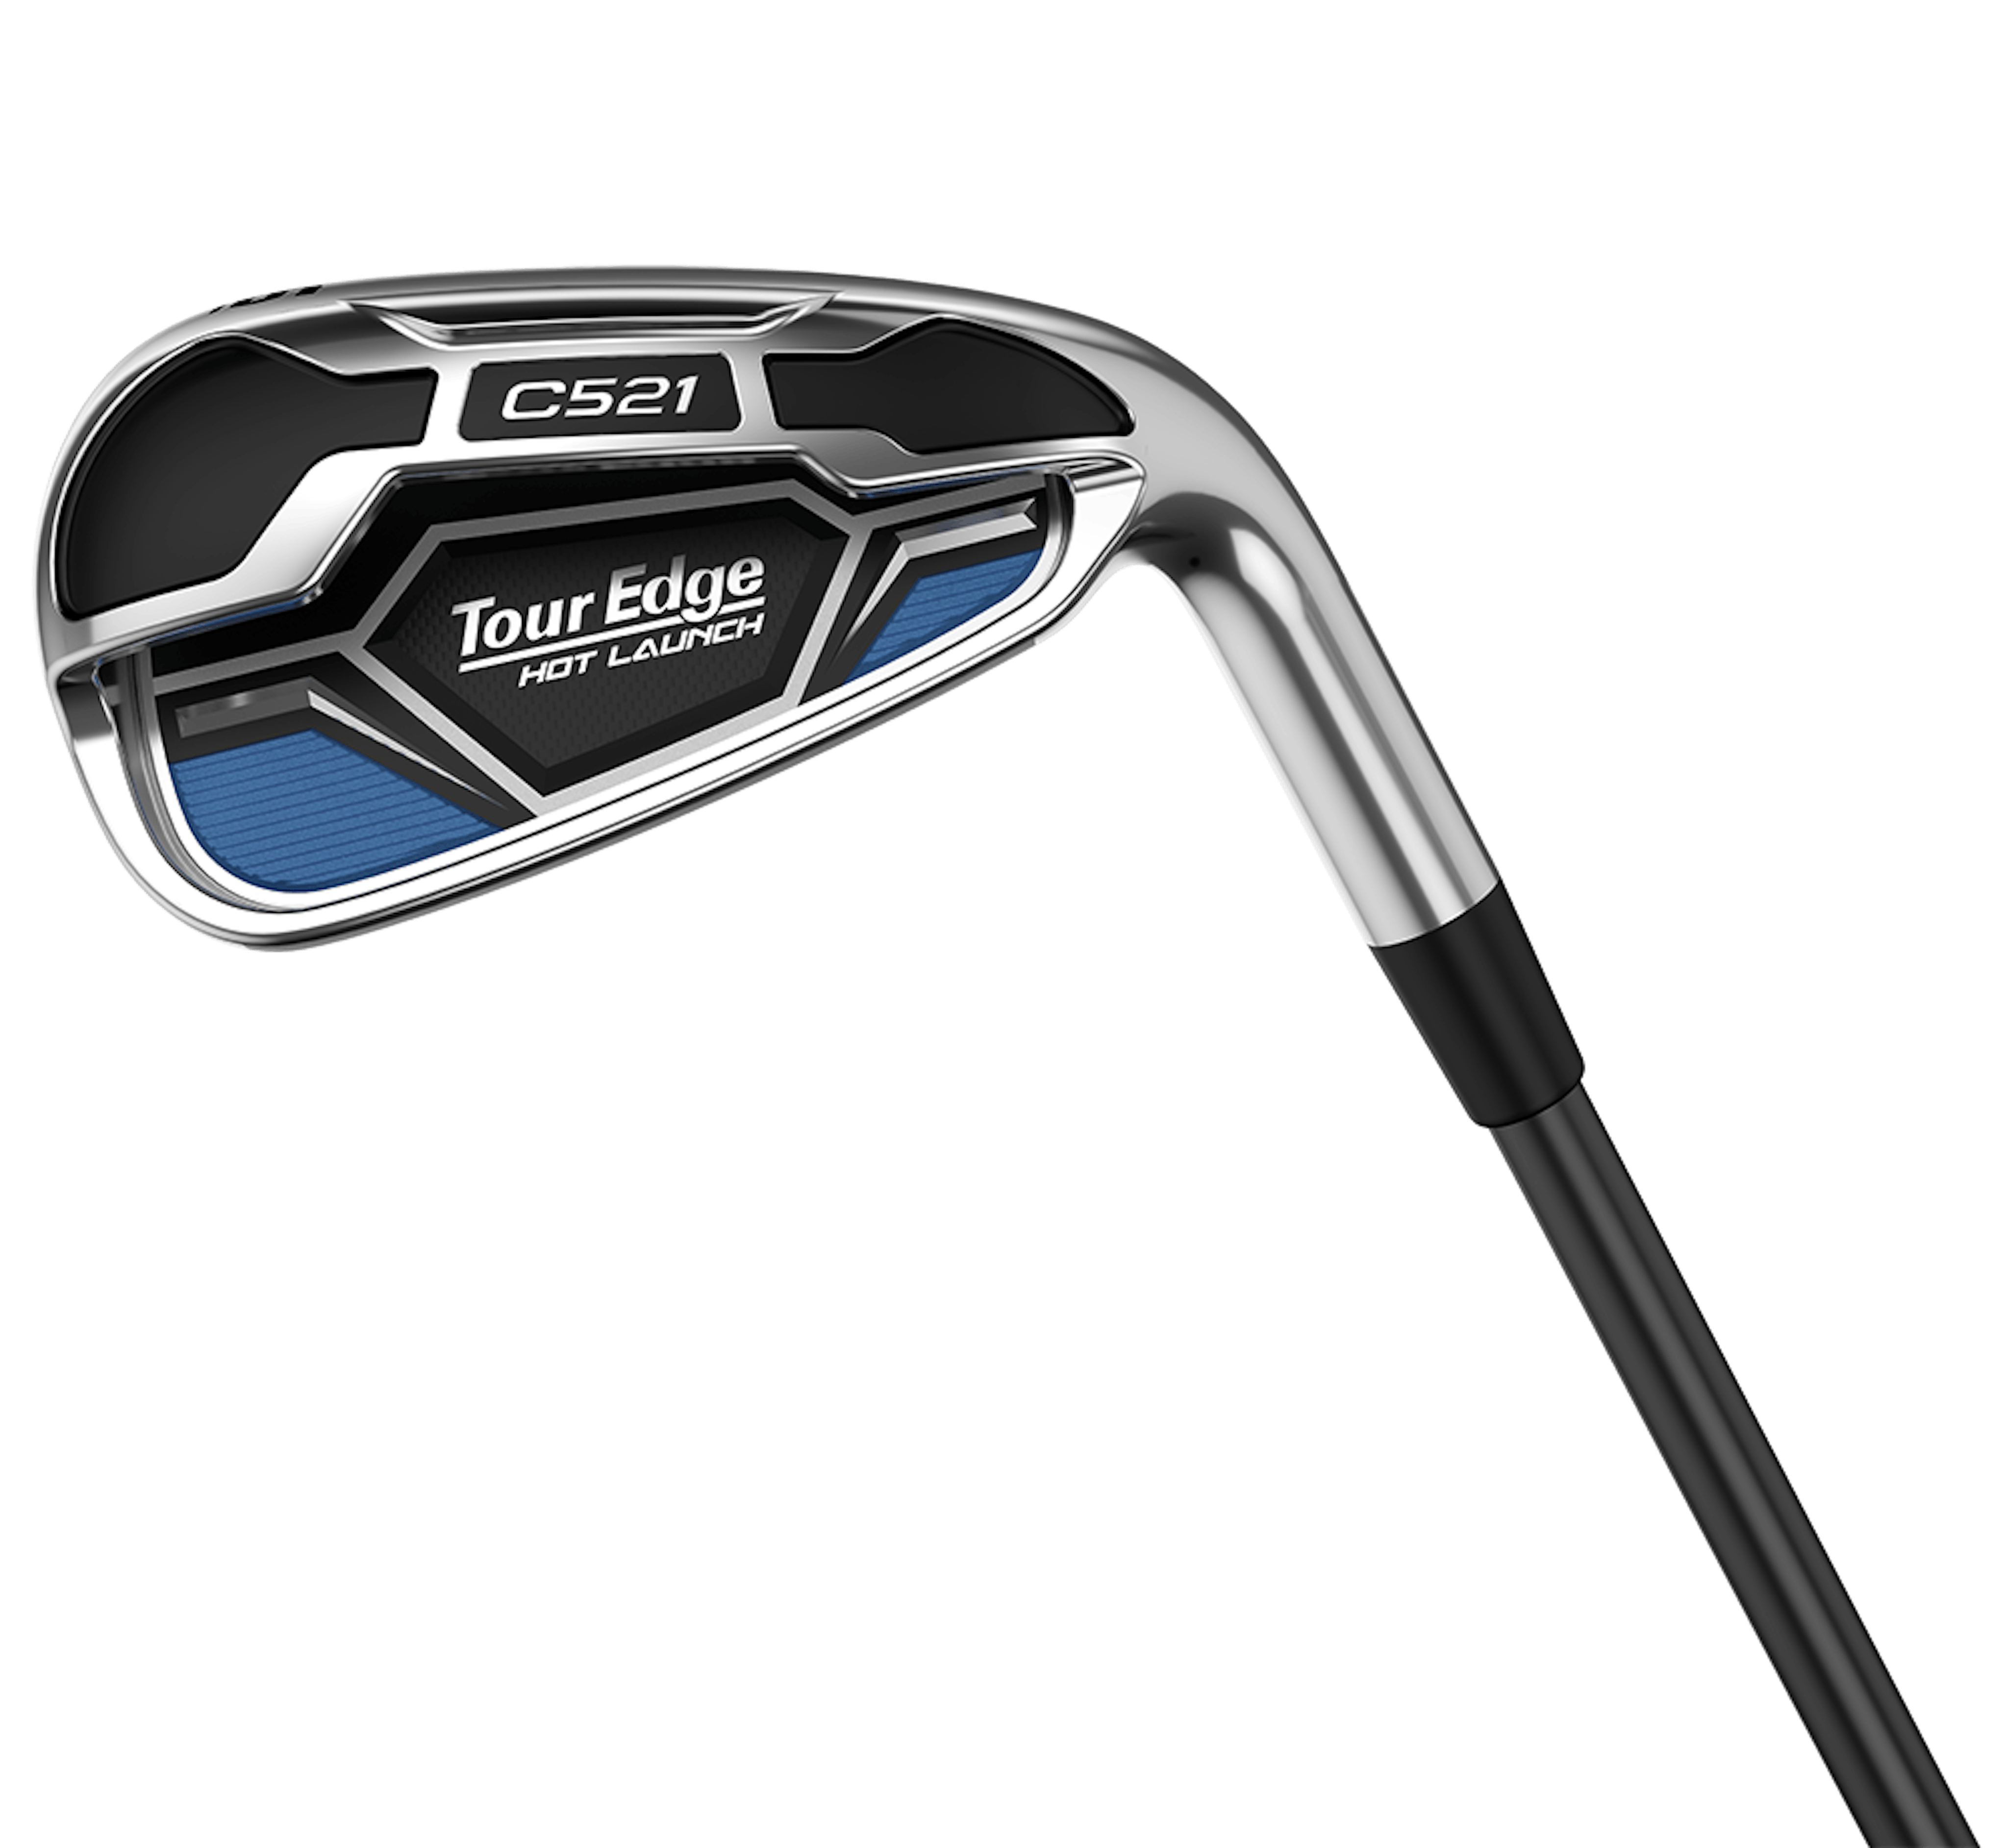 tour edge golf hot launch c521 irons review